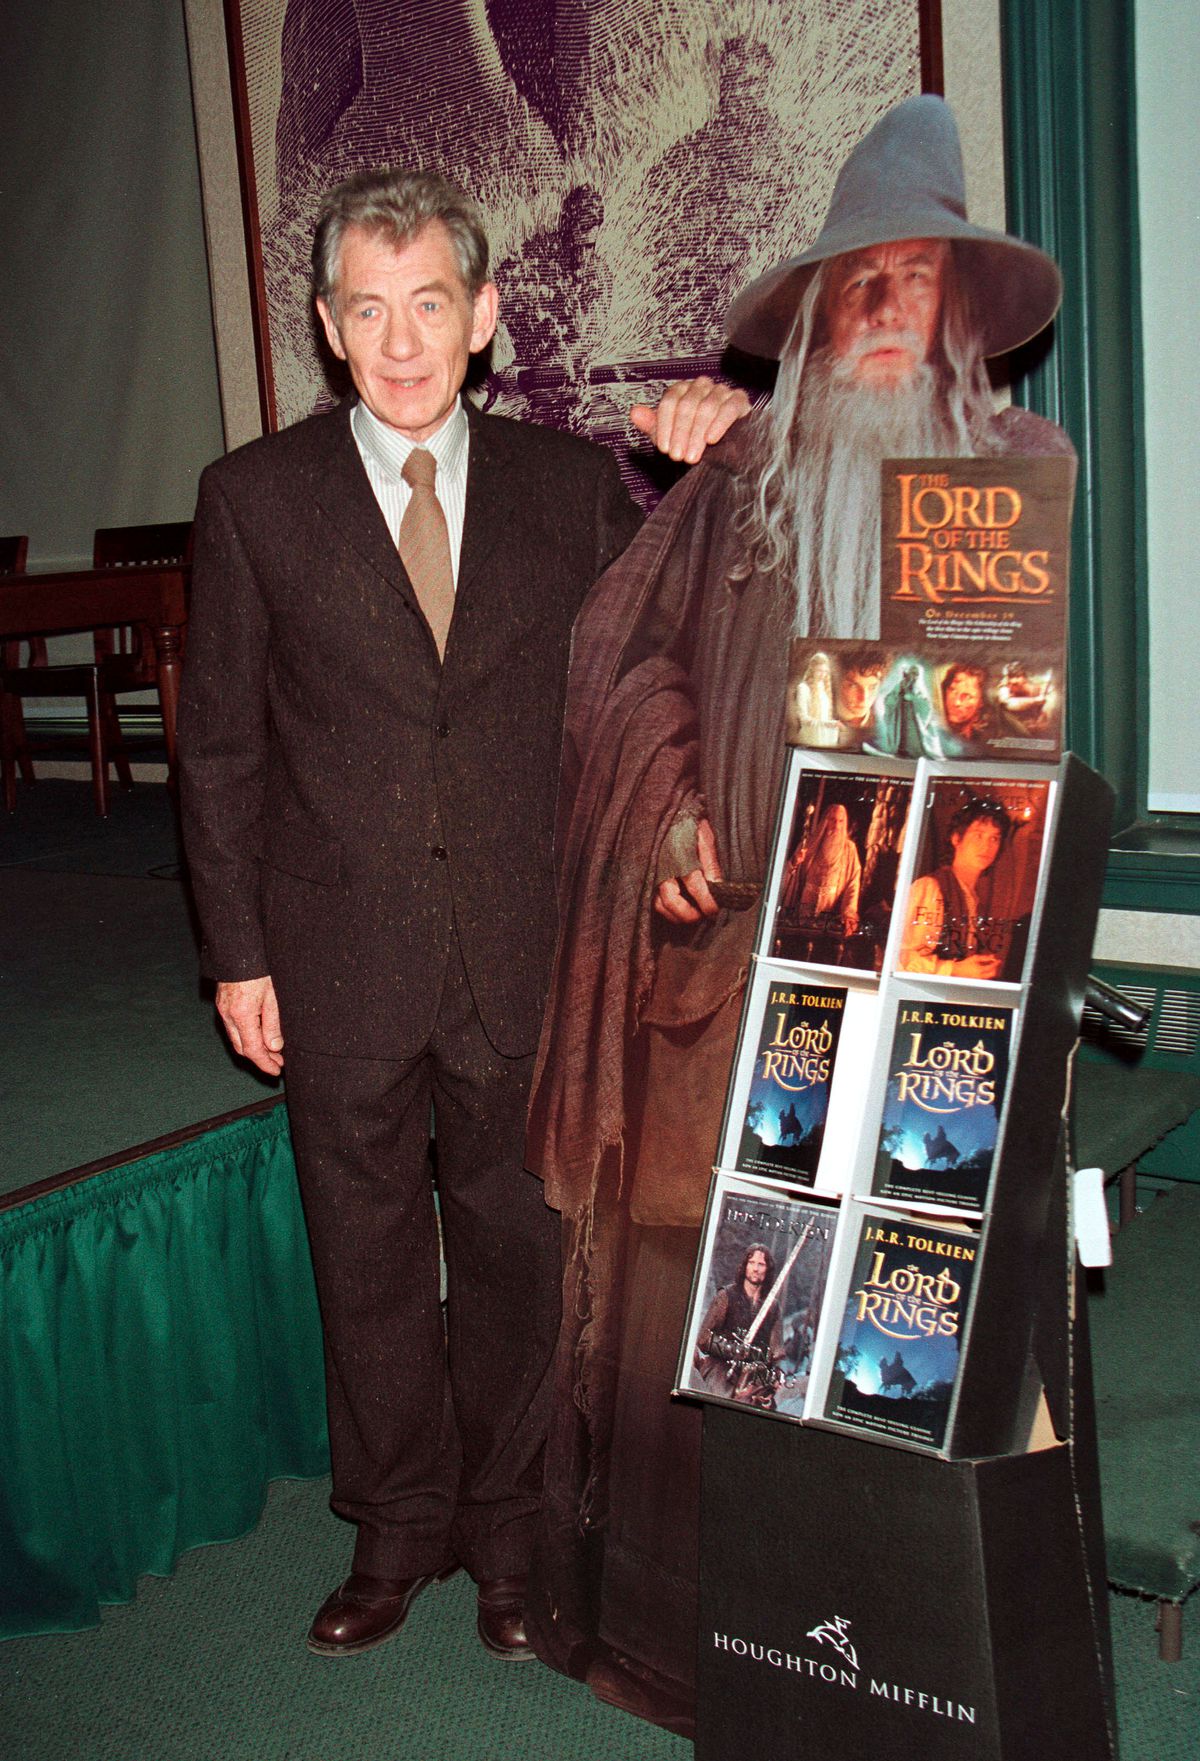 The Lord of the Rings Official Movie Guide Promotion by Ian McKellen